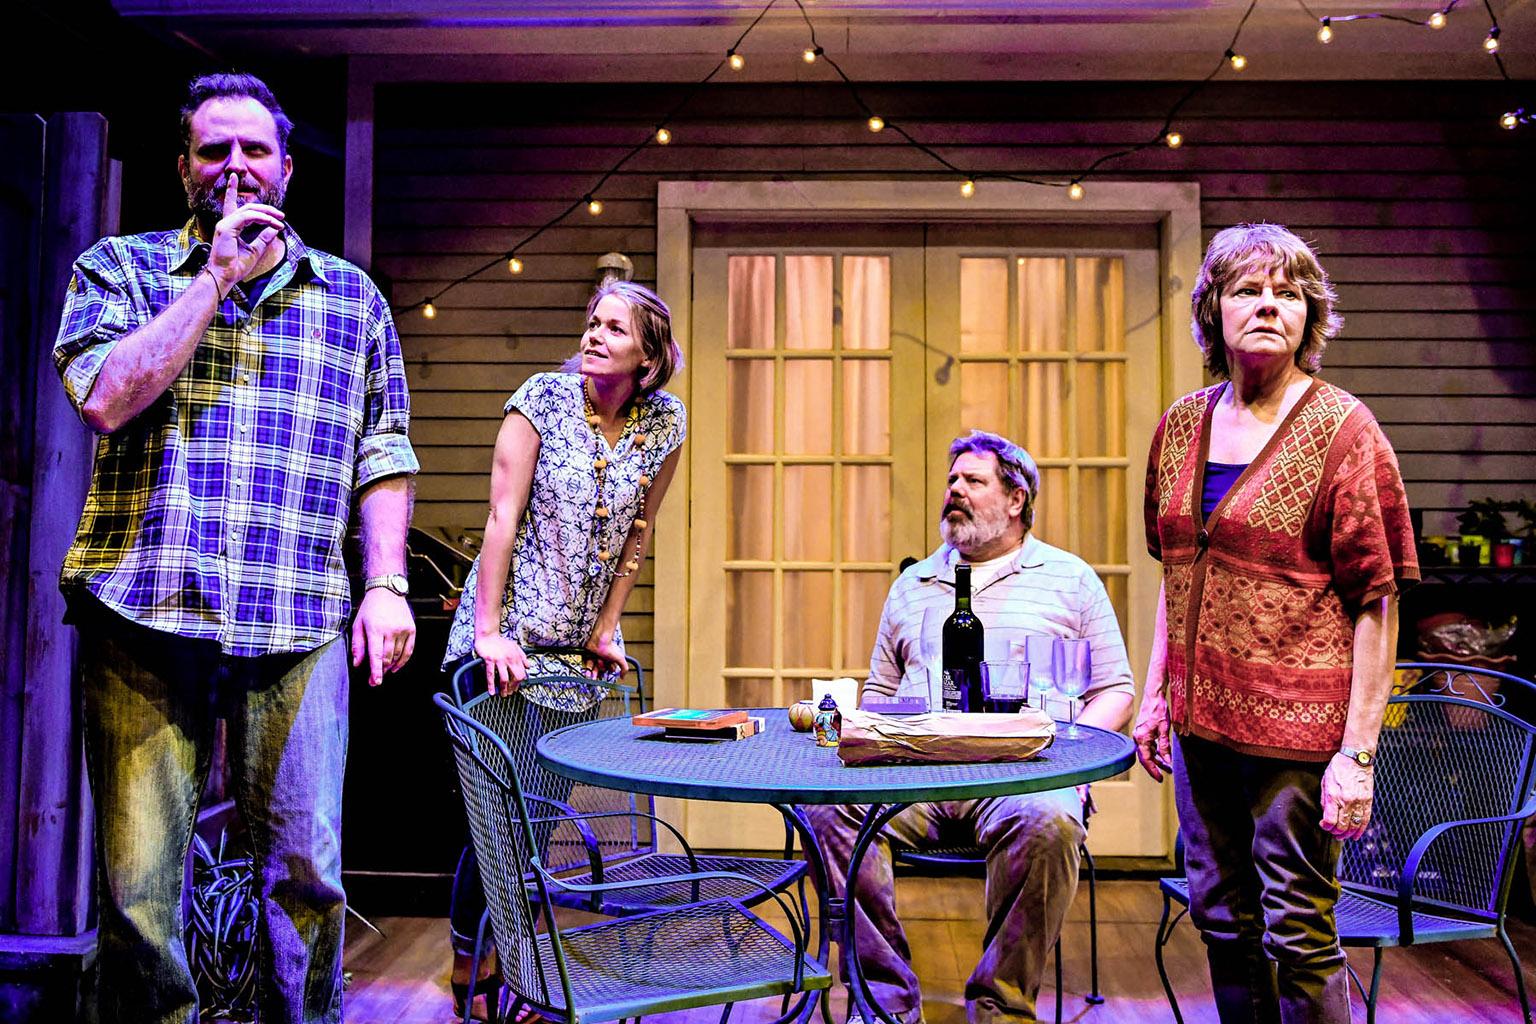 From left: Joseph Wiens, Cortney McKenna, H.B. Ward and Linda Reiter in “The Realistic Joneses.” (Photo by Evan Hanover)